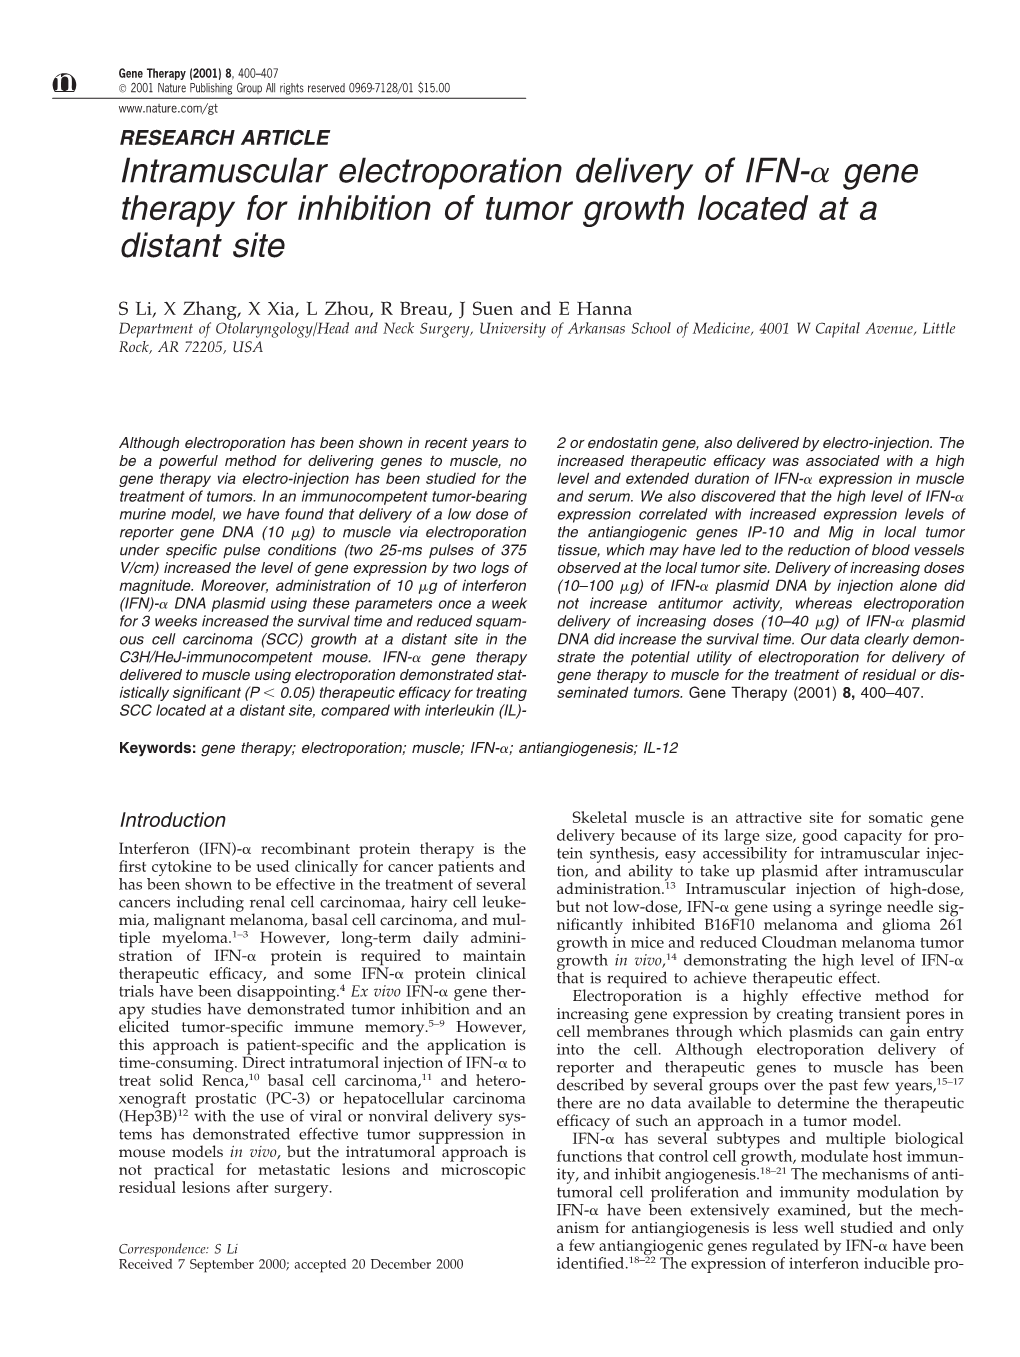 Intramuscular Electroporation Delivery of IFN- Gene Therapy for Inhibition of Tumor Growth Located at a Distant Site